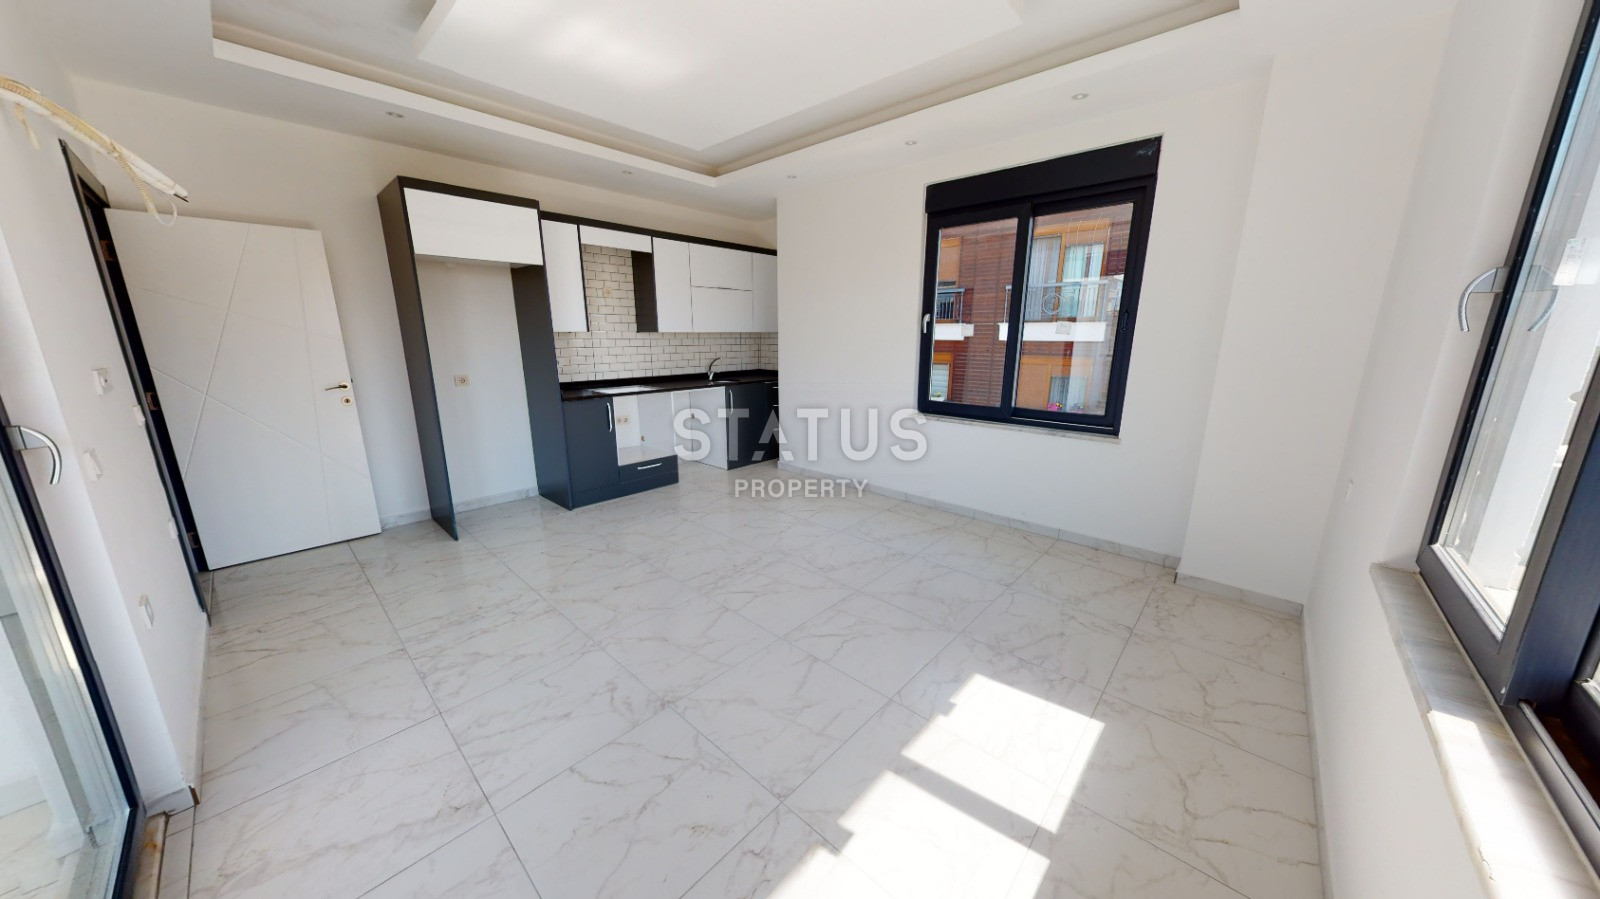 Duplex apartment in the central part of Alanya with a sea view. 120m2 фото 2